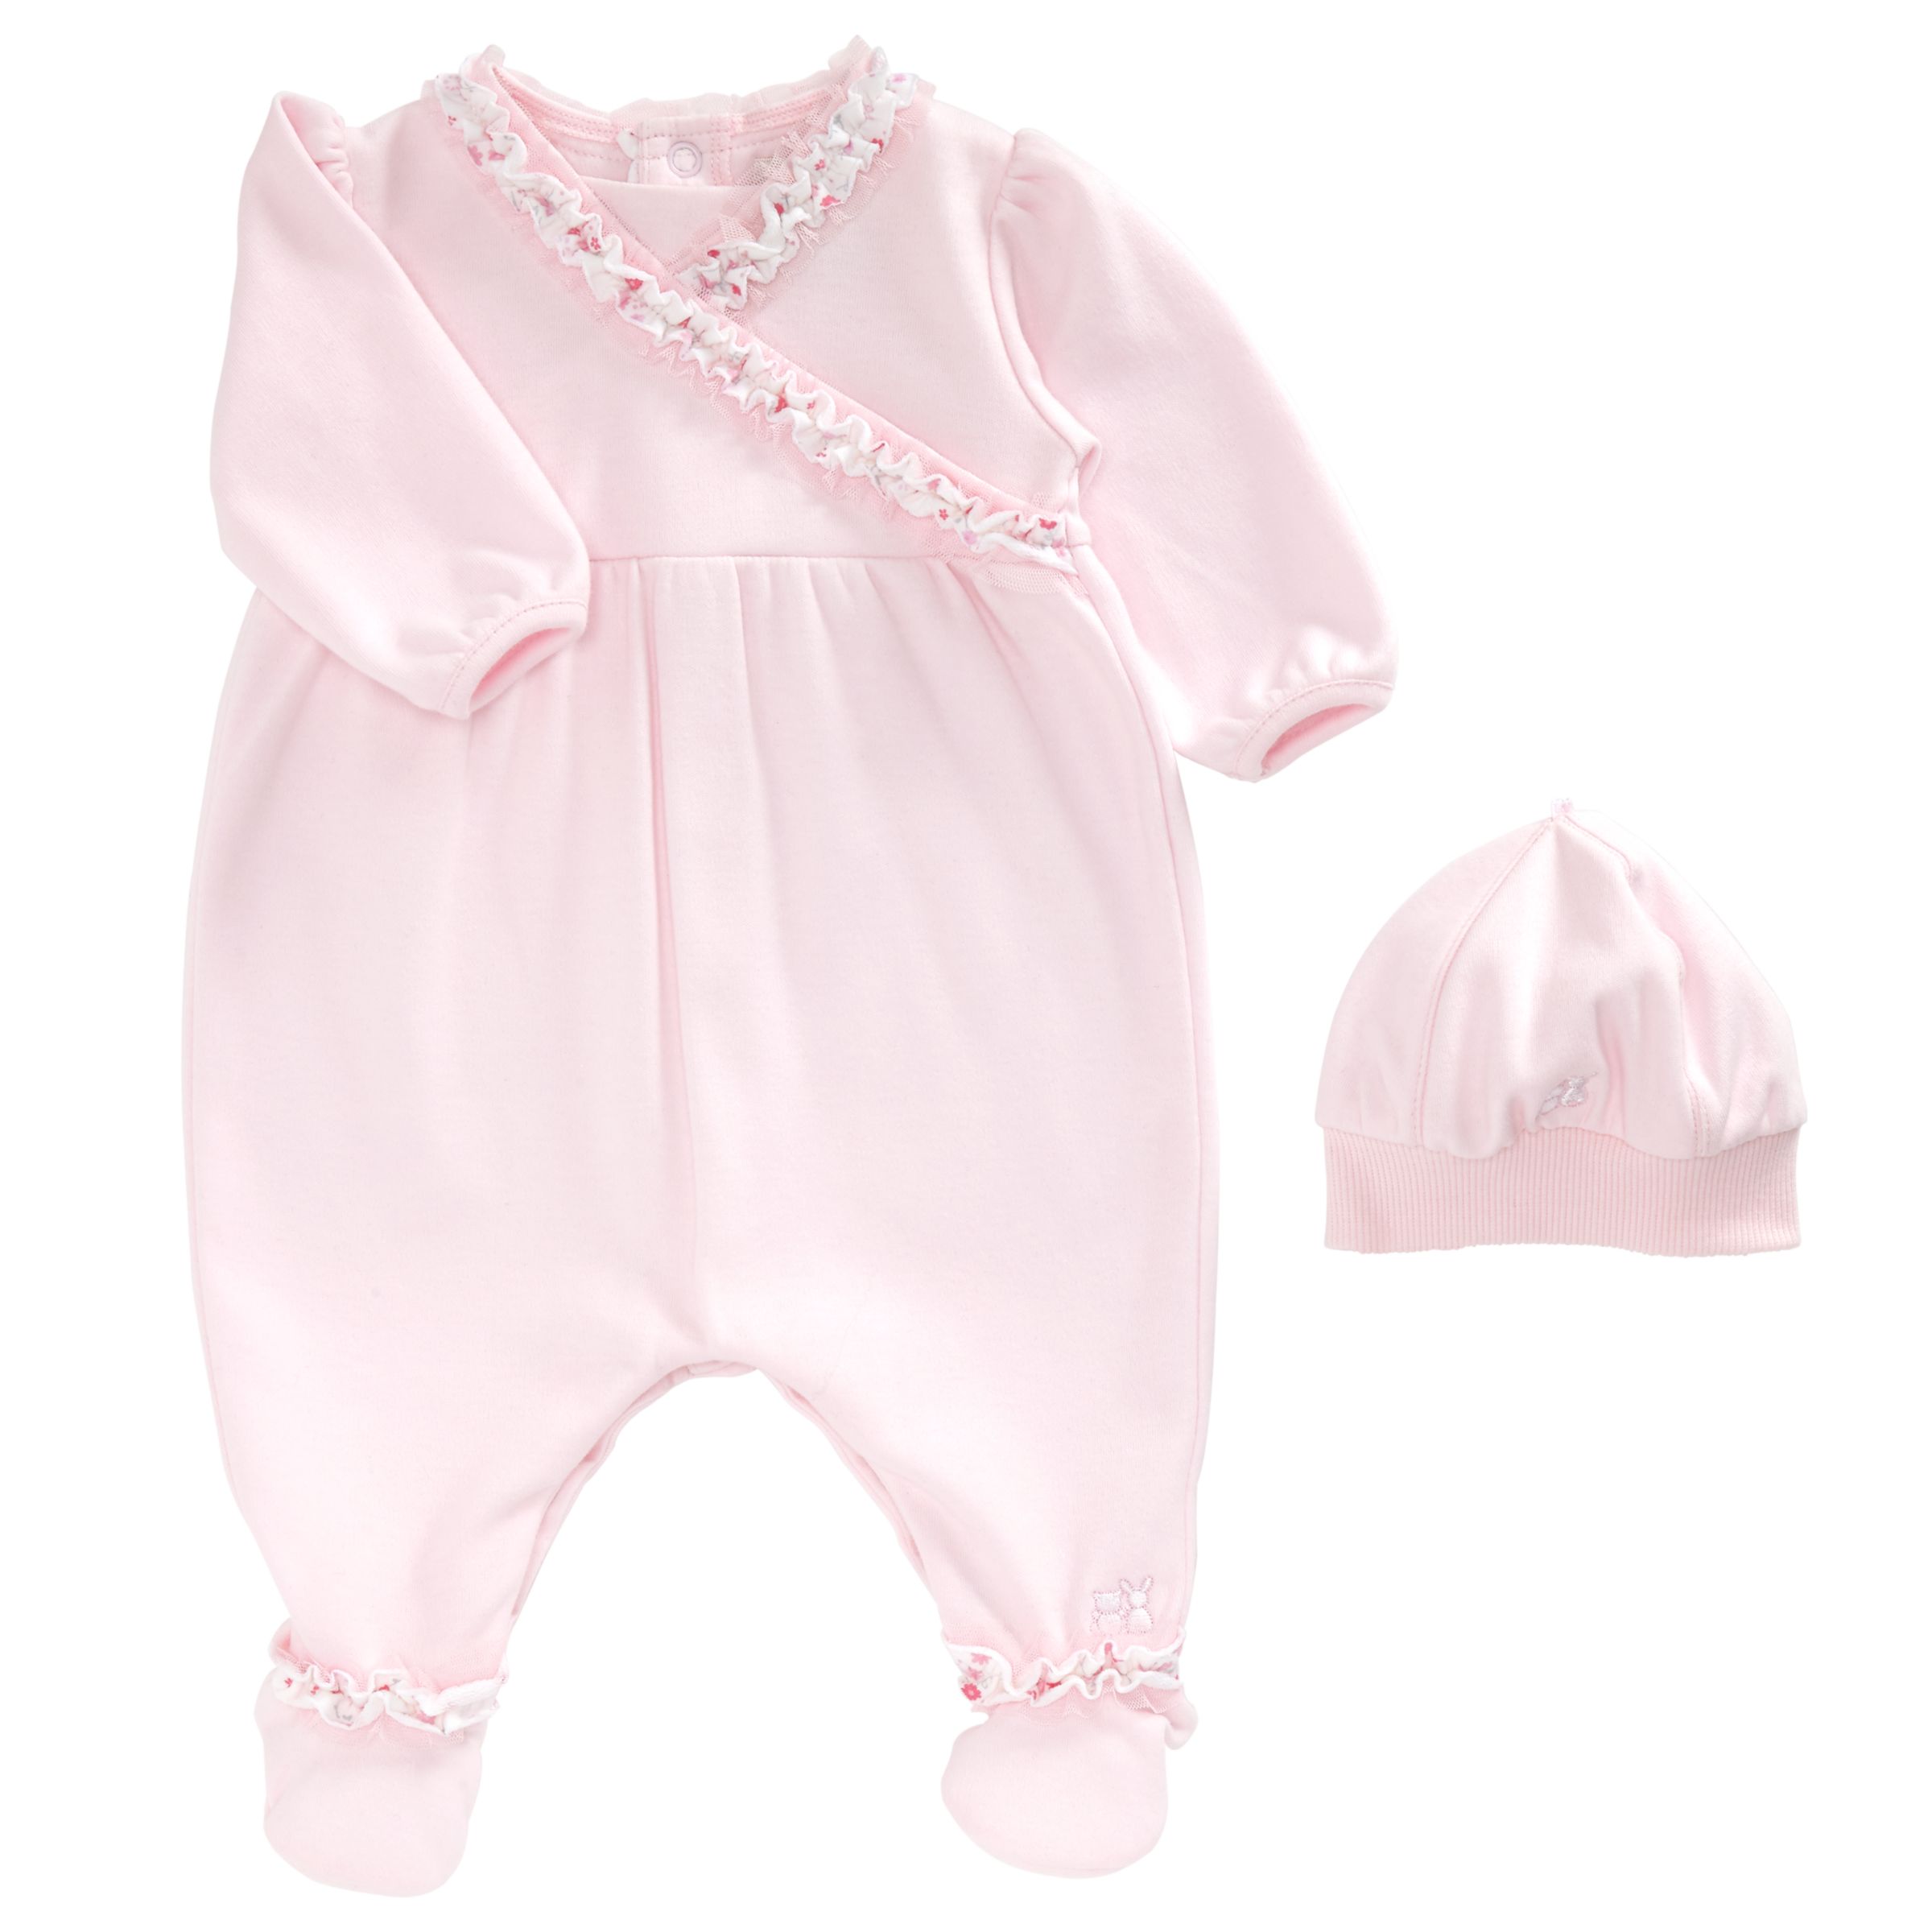 Emile et Rose Honor Sleepsuit and Hat 